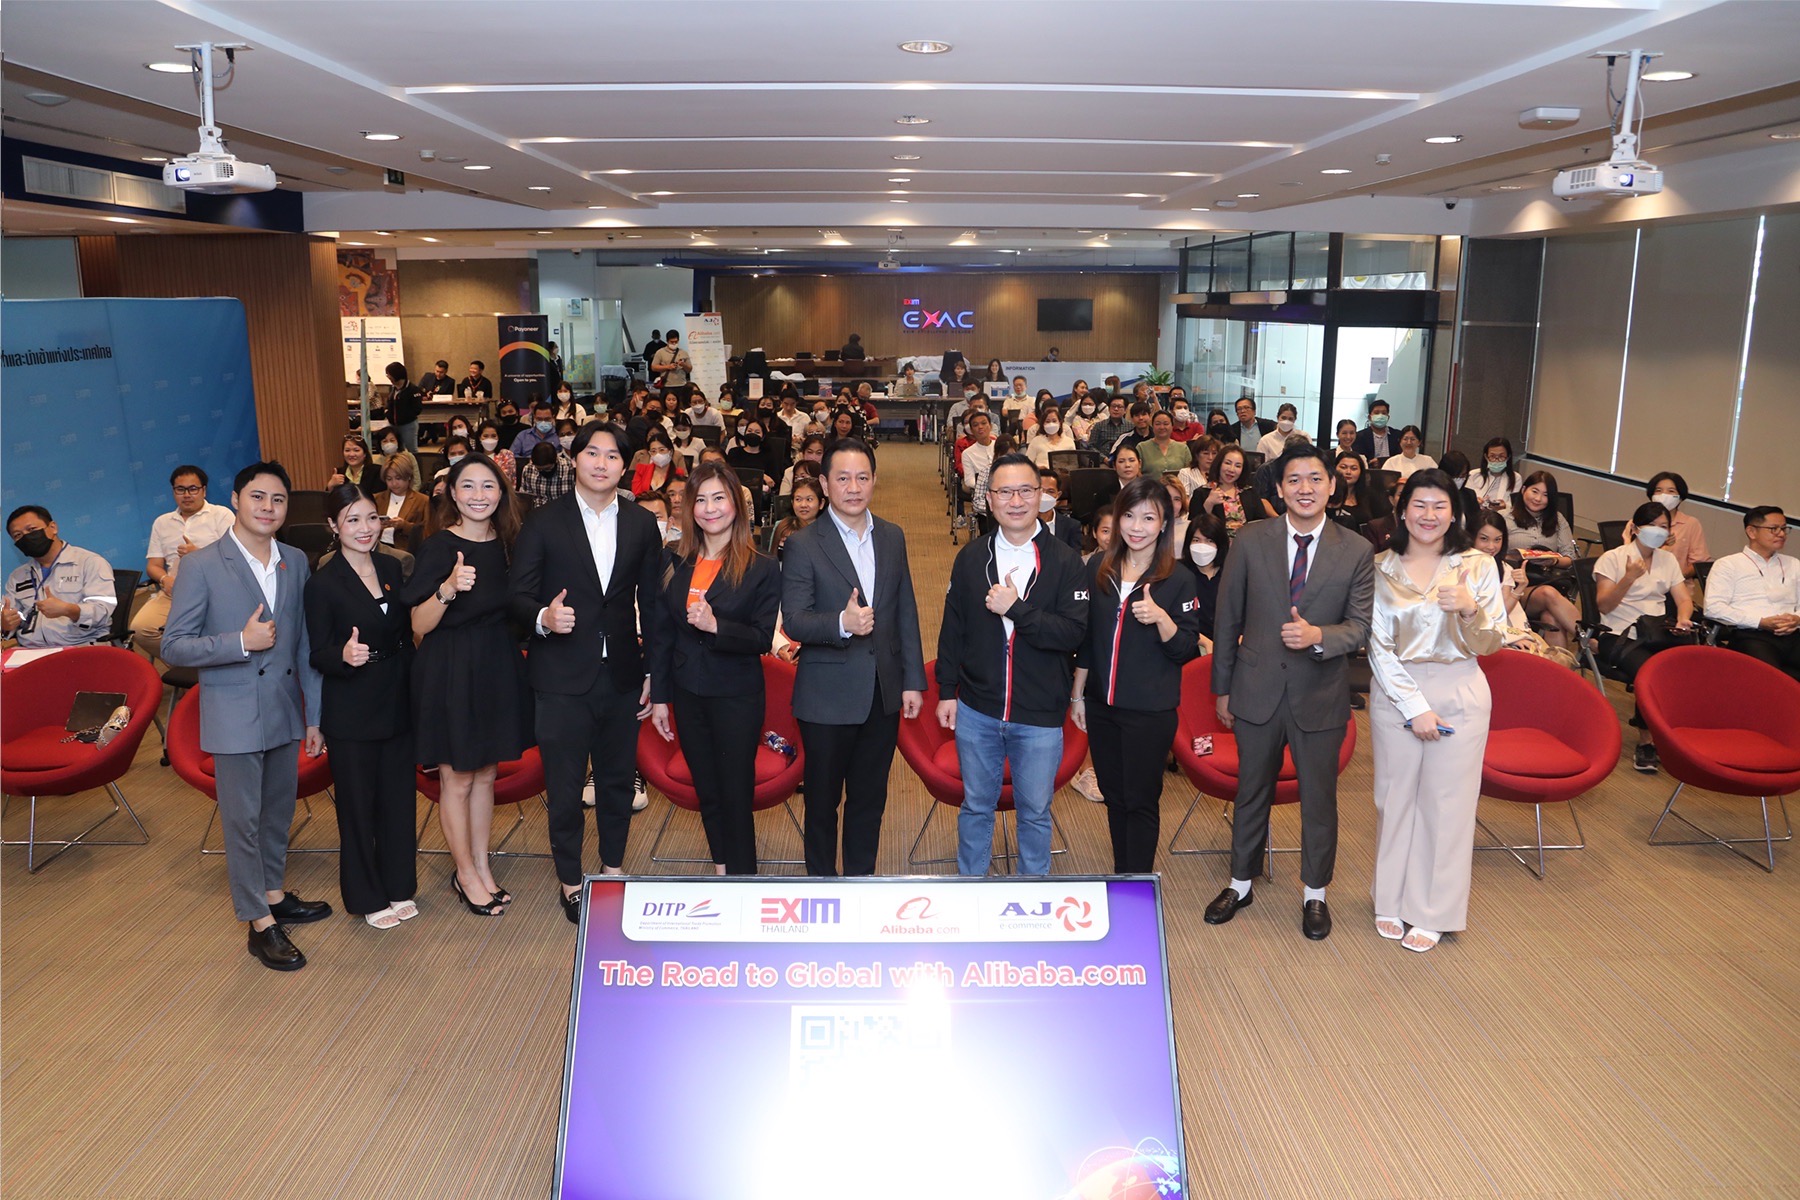 EXIM Thailand Launches “The Road to Global E-Commerce” Project Empowering Thai SMEs to Reach Global Market via Alibaba.com